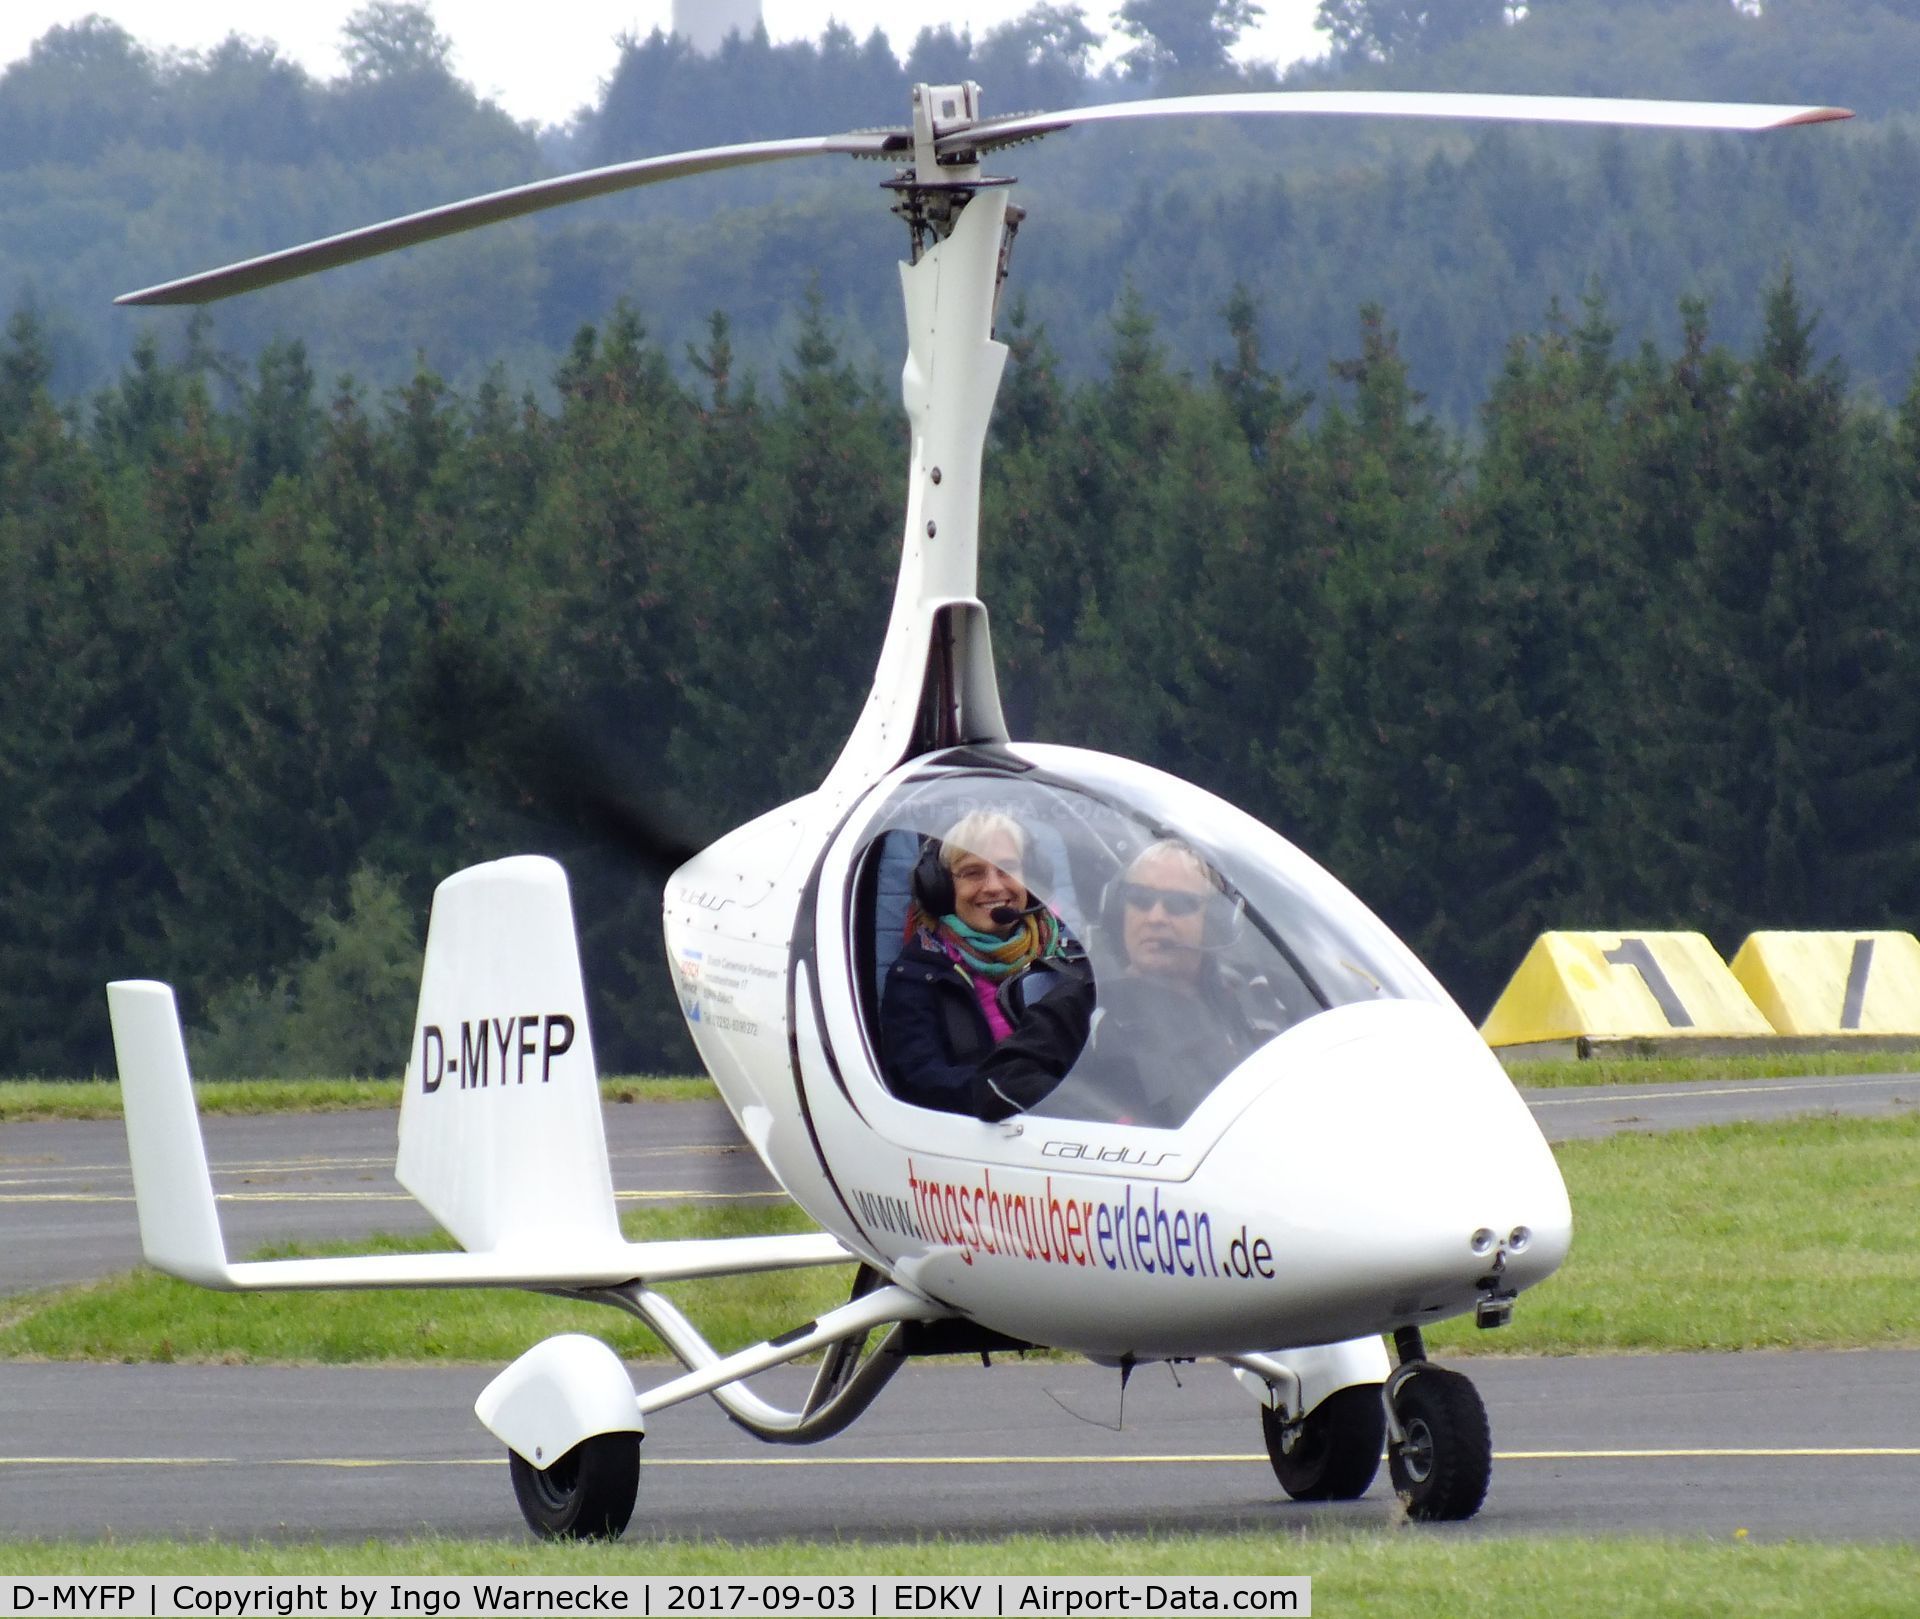 D-MYFP, AutoGyro Calidus C/N not foung D-Myfp, AutoGyro Calidus at the Dahlemer Binz 60th jubilee airfield display